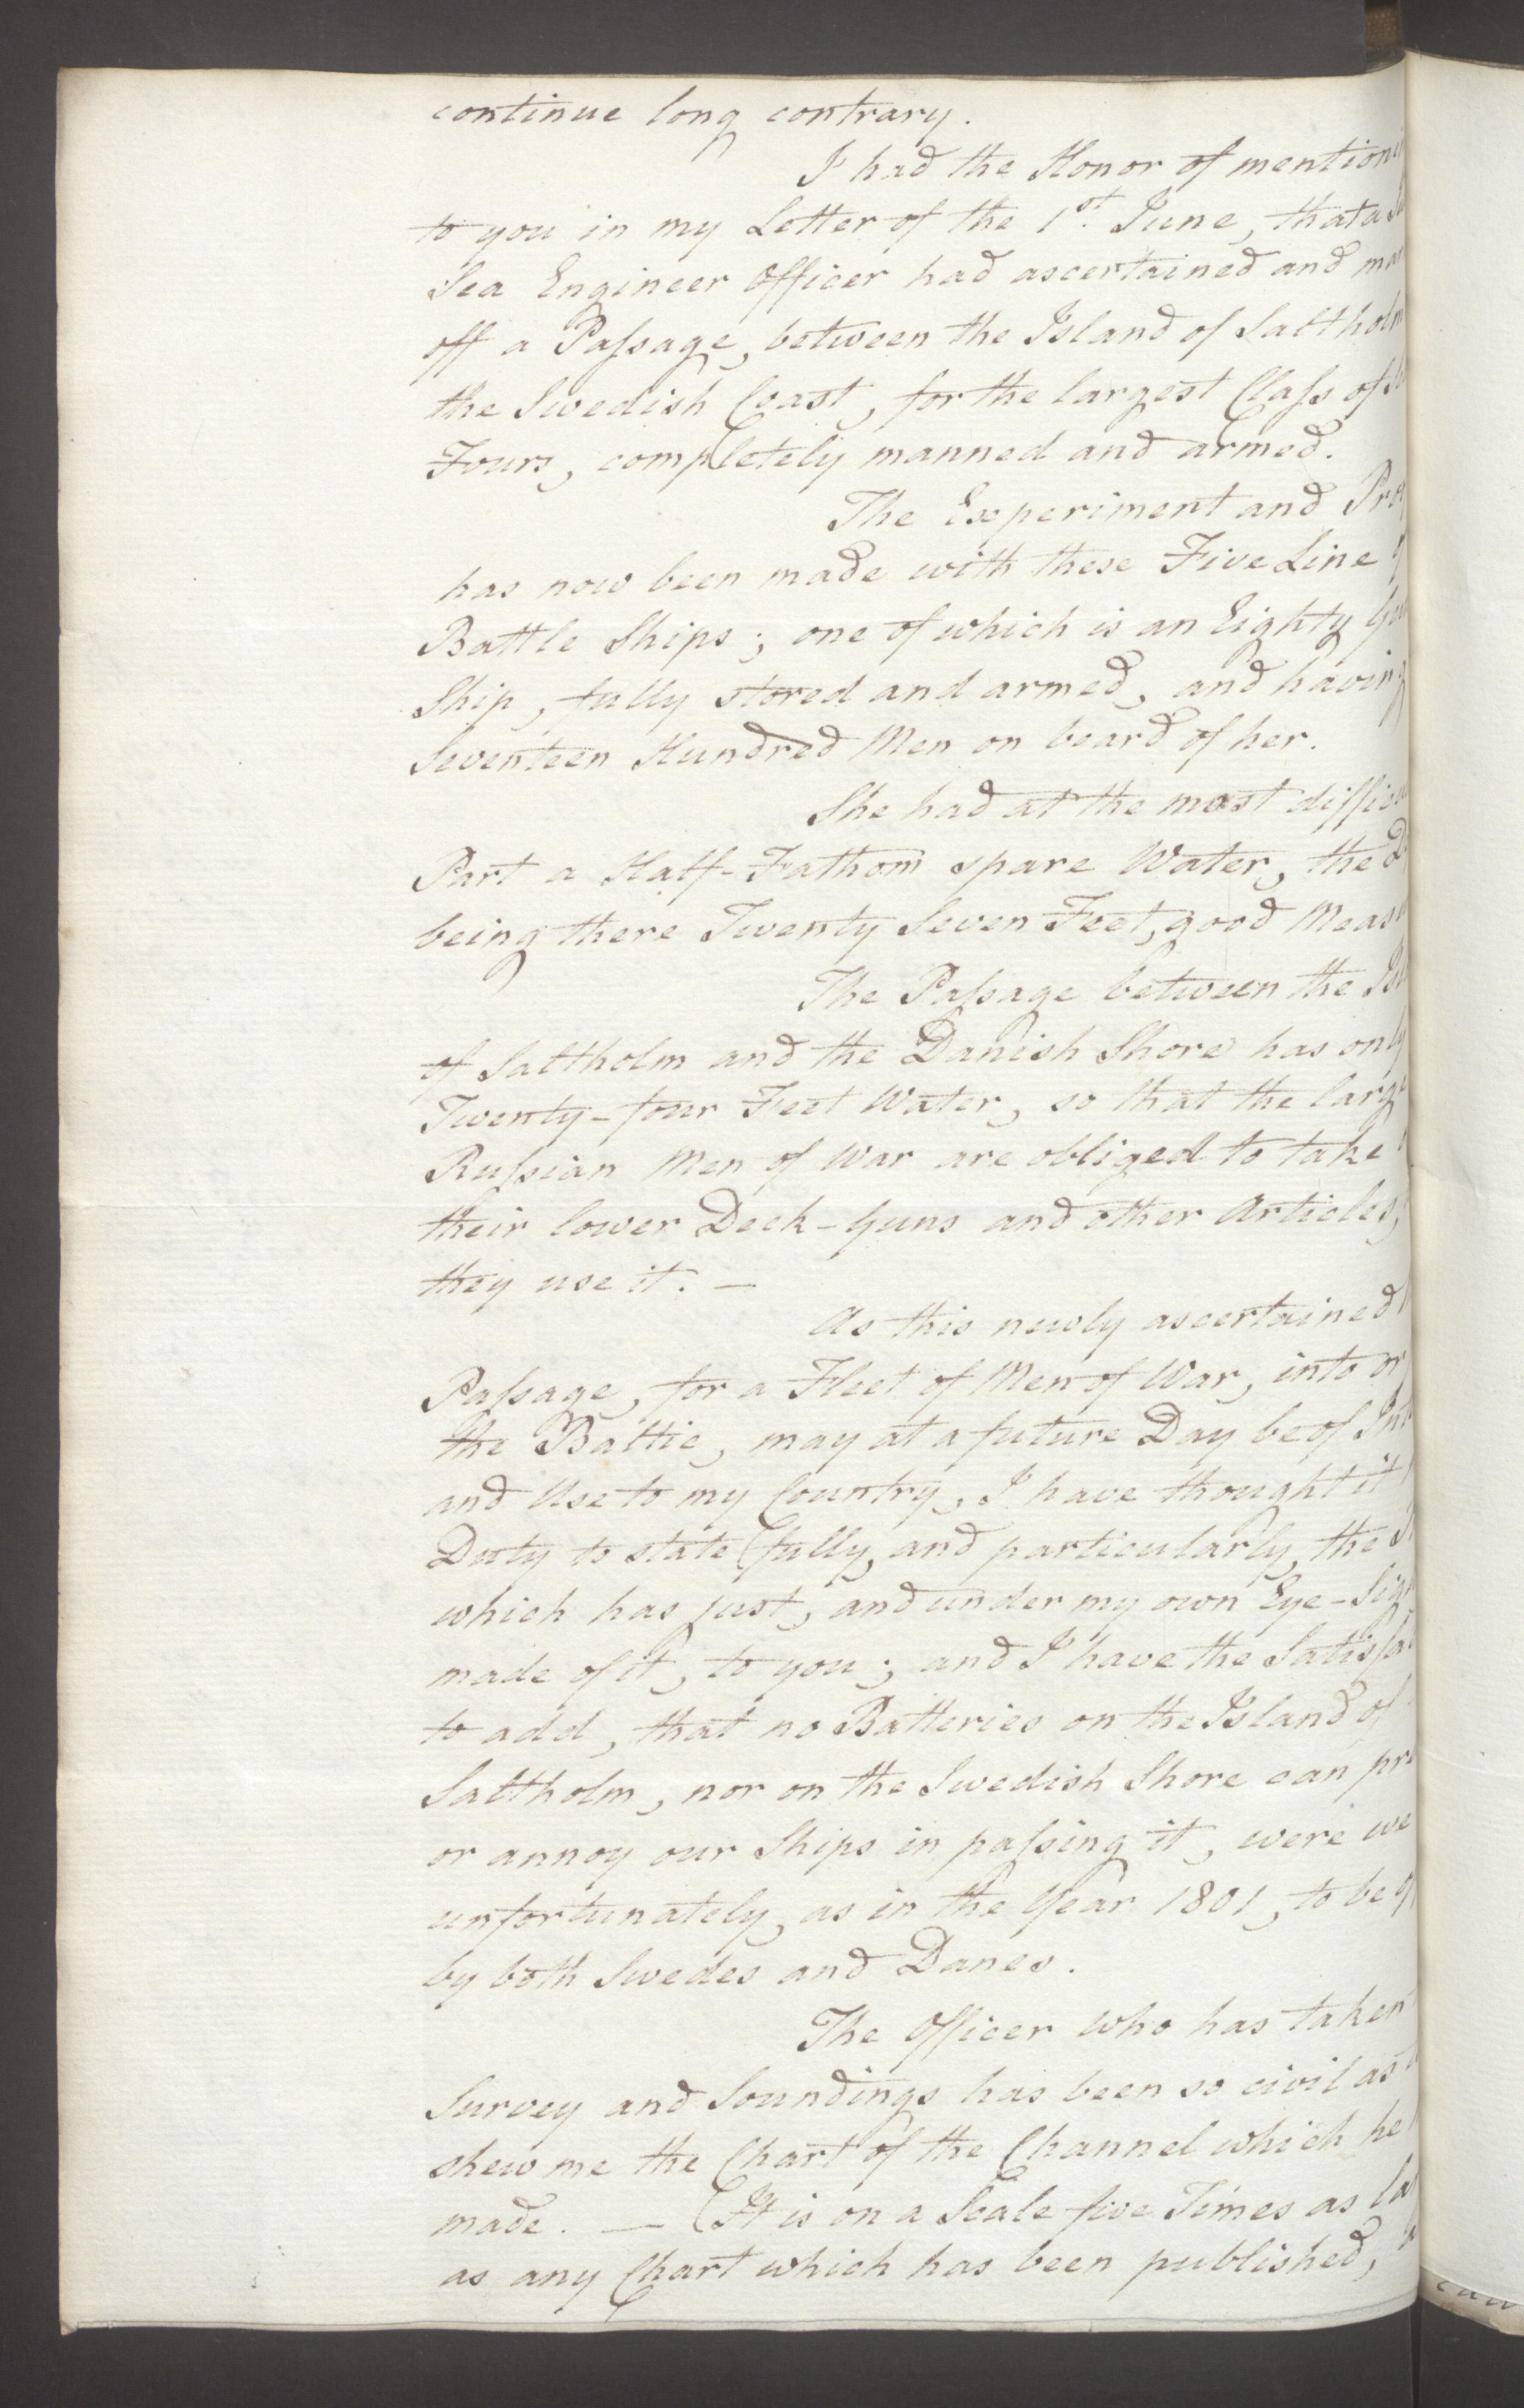 Foreign Office*, UKA/-/FO 38/16: Sir C. Gordon. Reports from Malmö, Jonkoping, and Helsingborg, 1814, s. 68